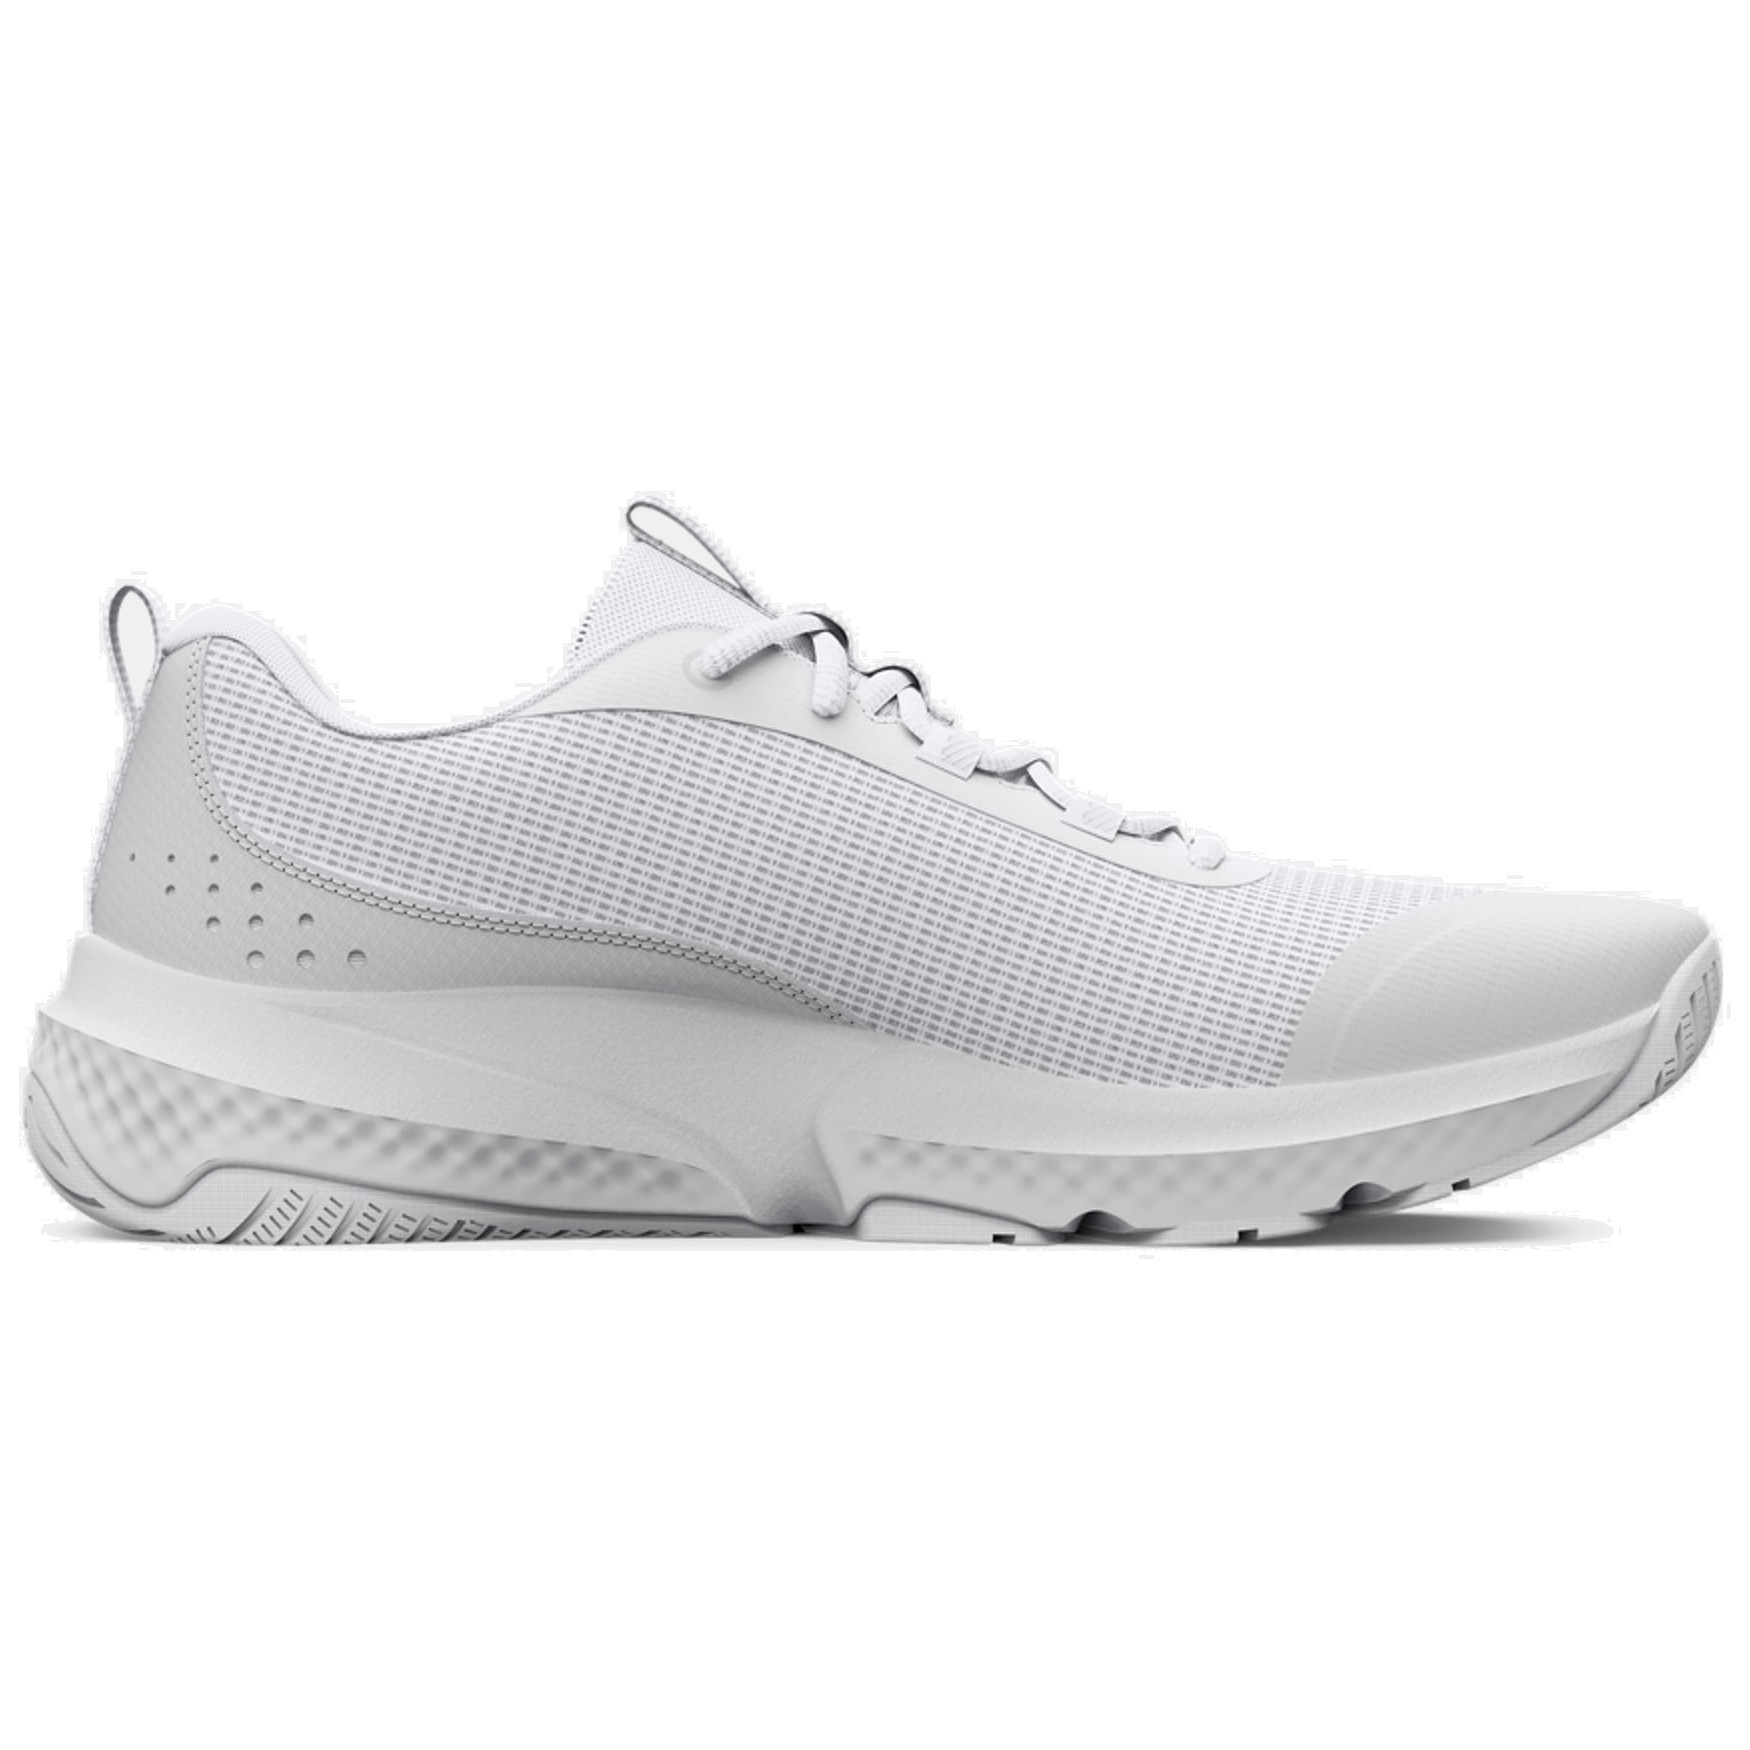 Under Armour Chaussure de Training Homme - UA Dynamic Select - Blanc/Halo  Gray